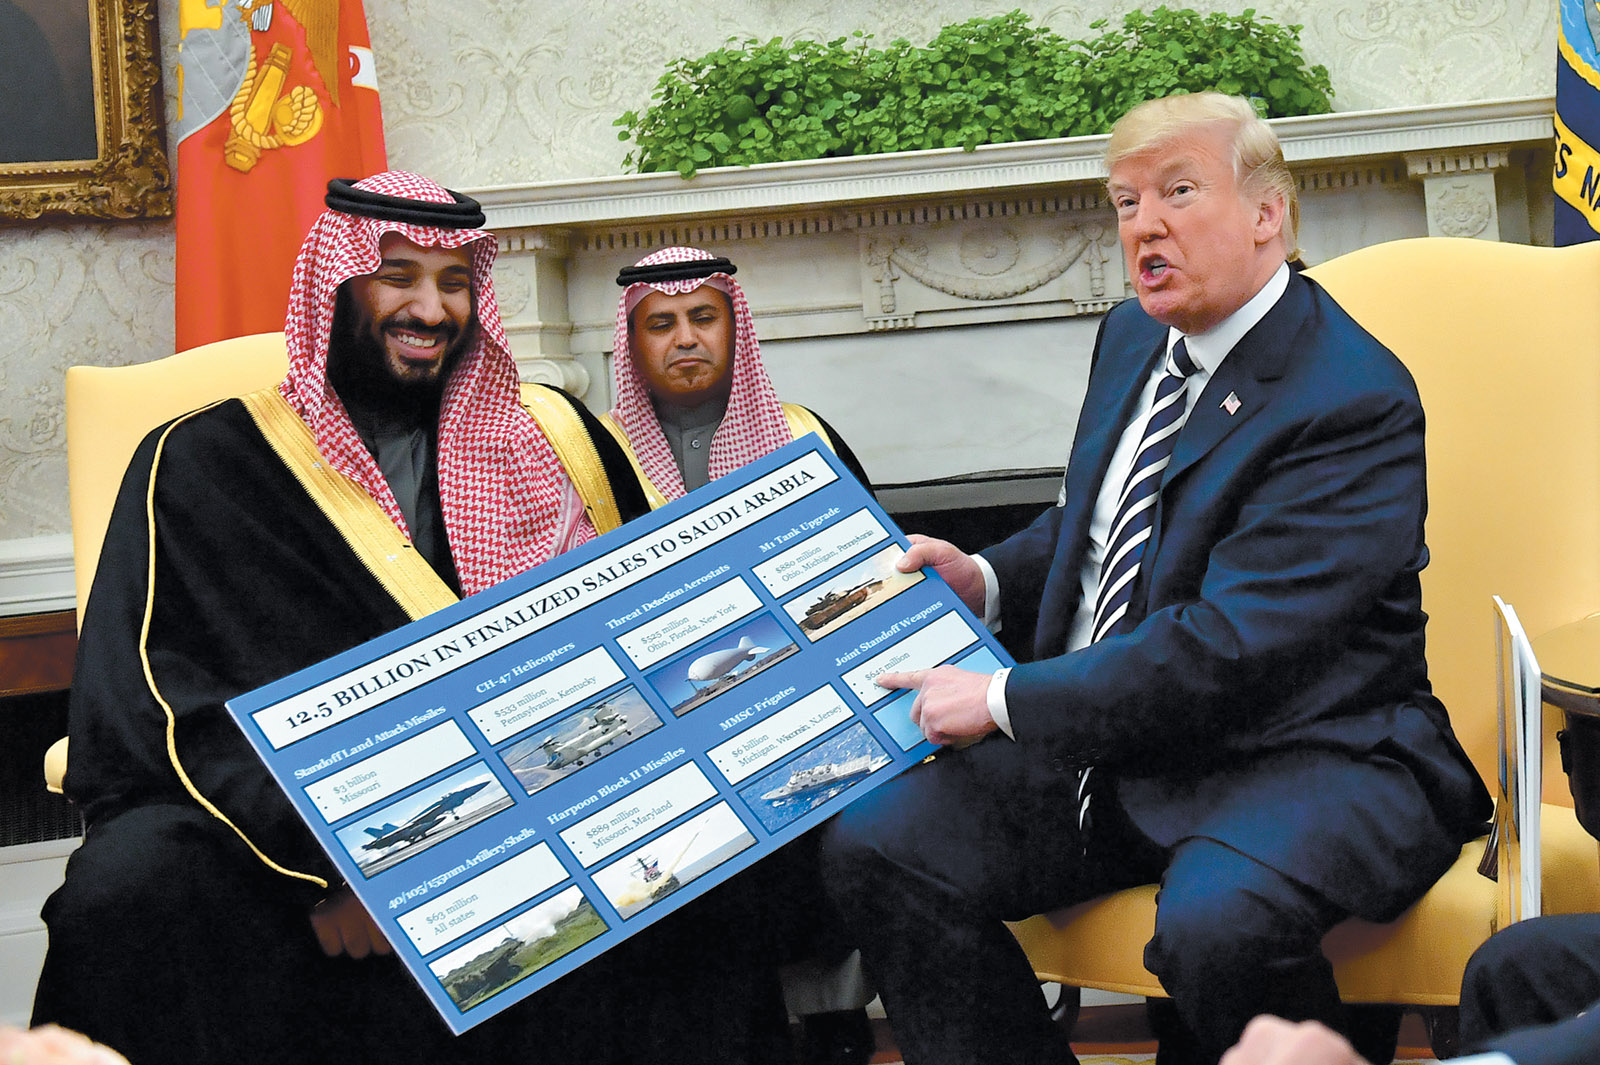 Trump with Mohammad bin Salman at the White House, March 2018